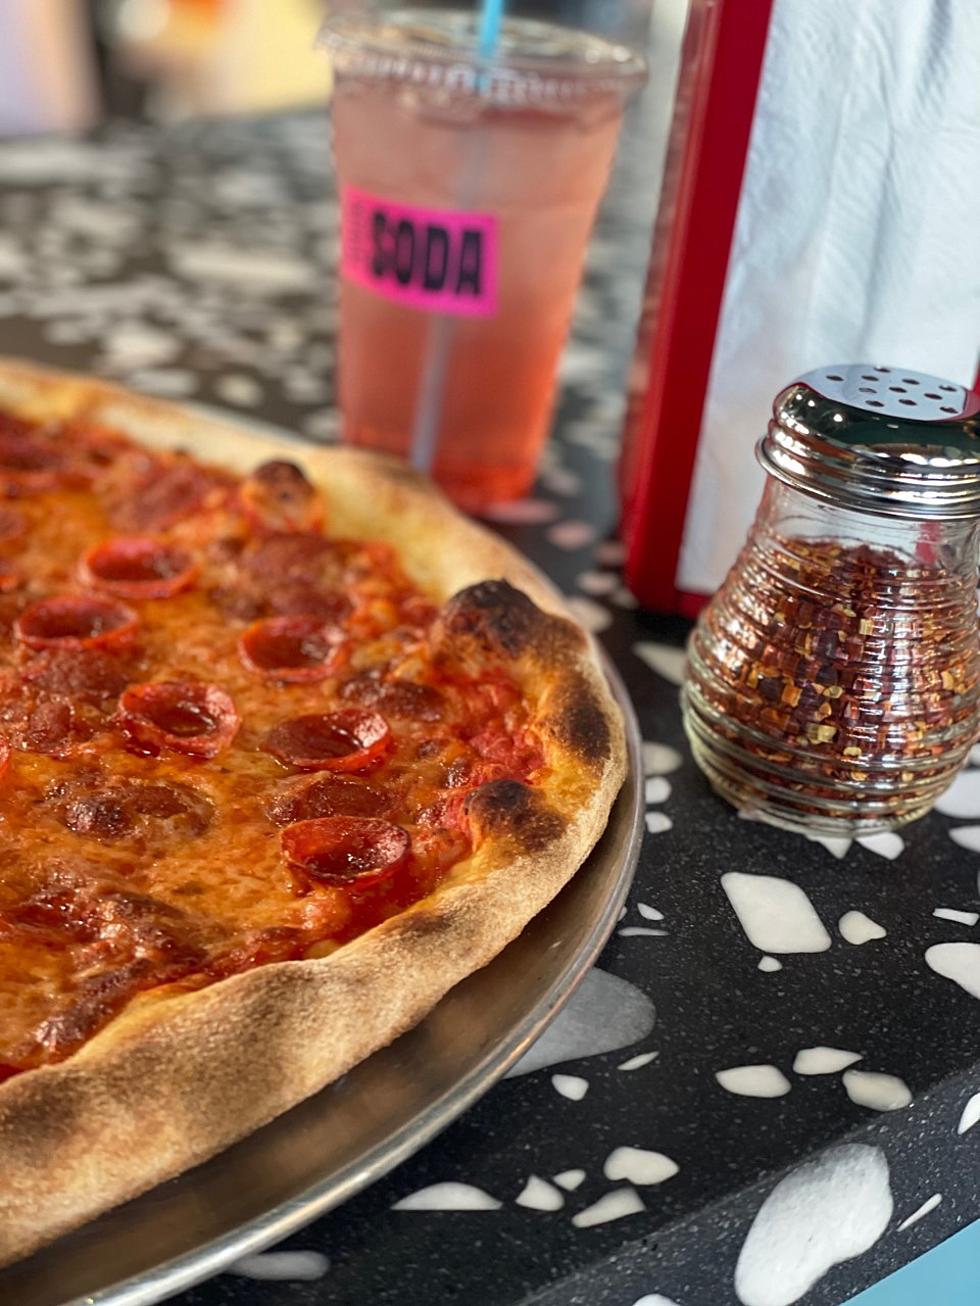 Asbury Park, NJ Welcomes Pizzeria With New York-Style Pizza &#038; Homemade Soda